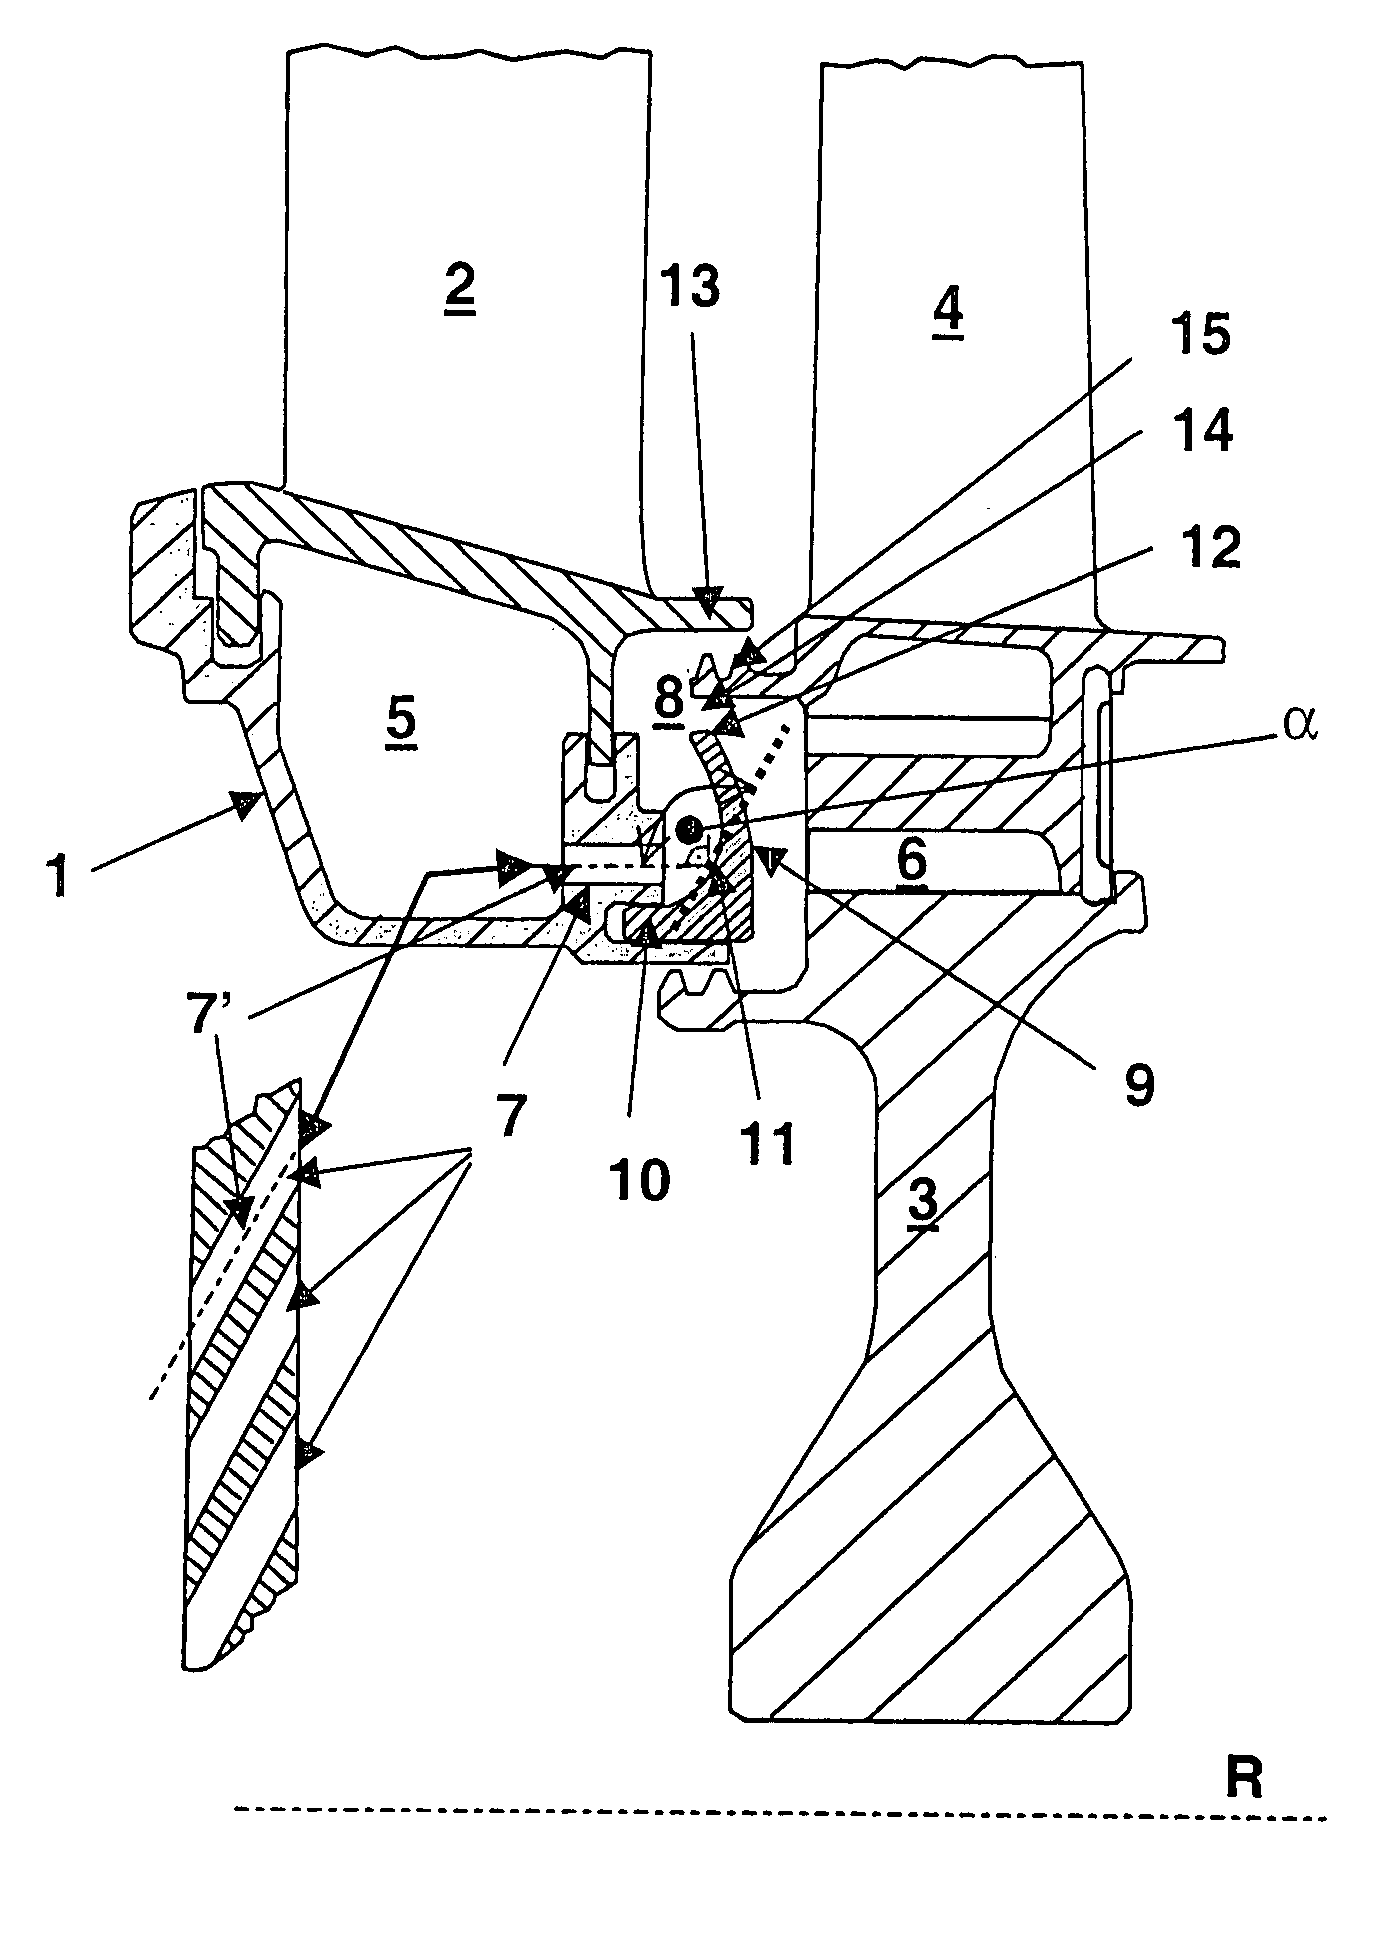 Device for separating foreign particles out of the cooling air that can be fed to the rotor blades of a turbine